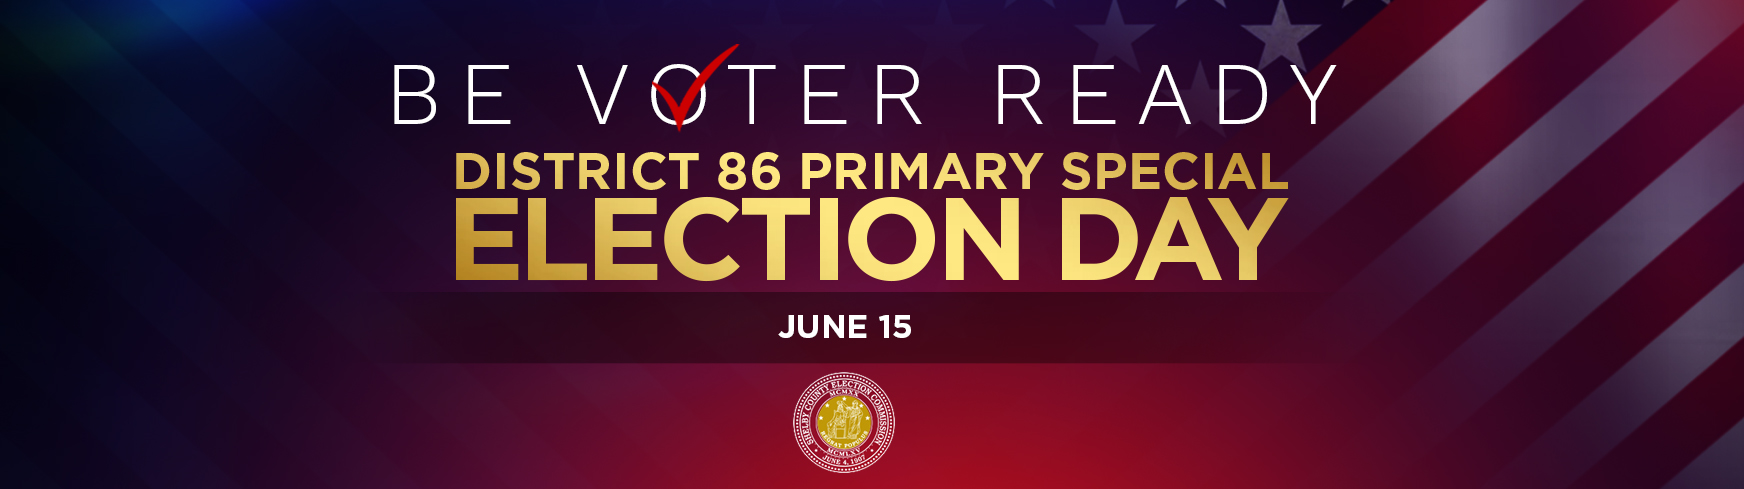 Primary Special Elections